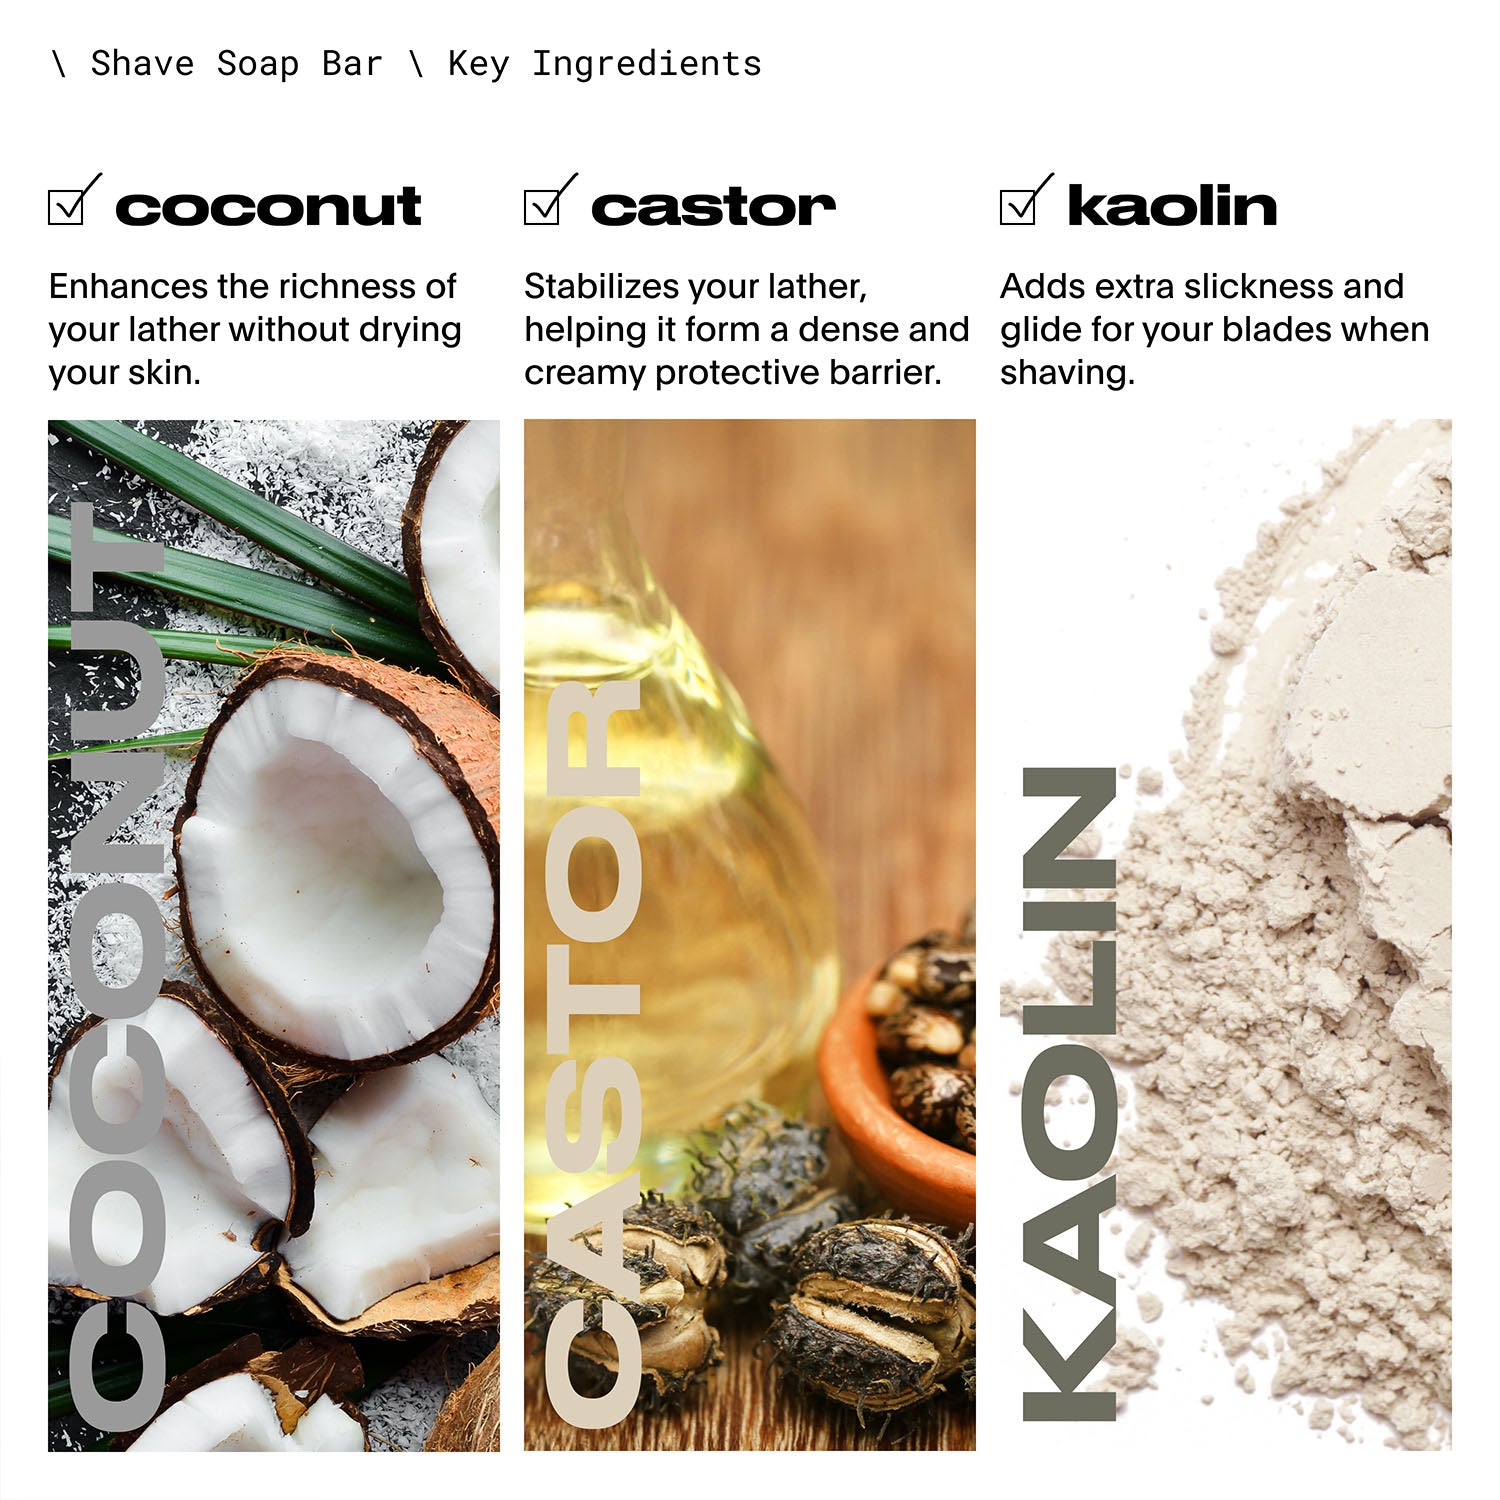 Infographic with three key ingredients: coconut oil, castor oil, kaolin clay.